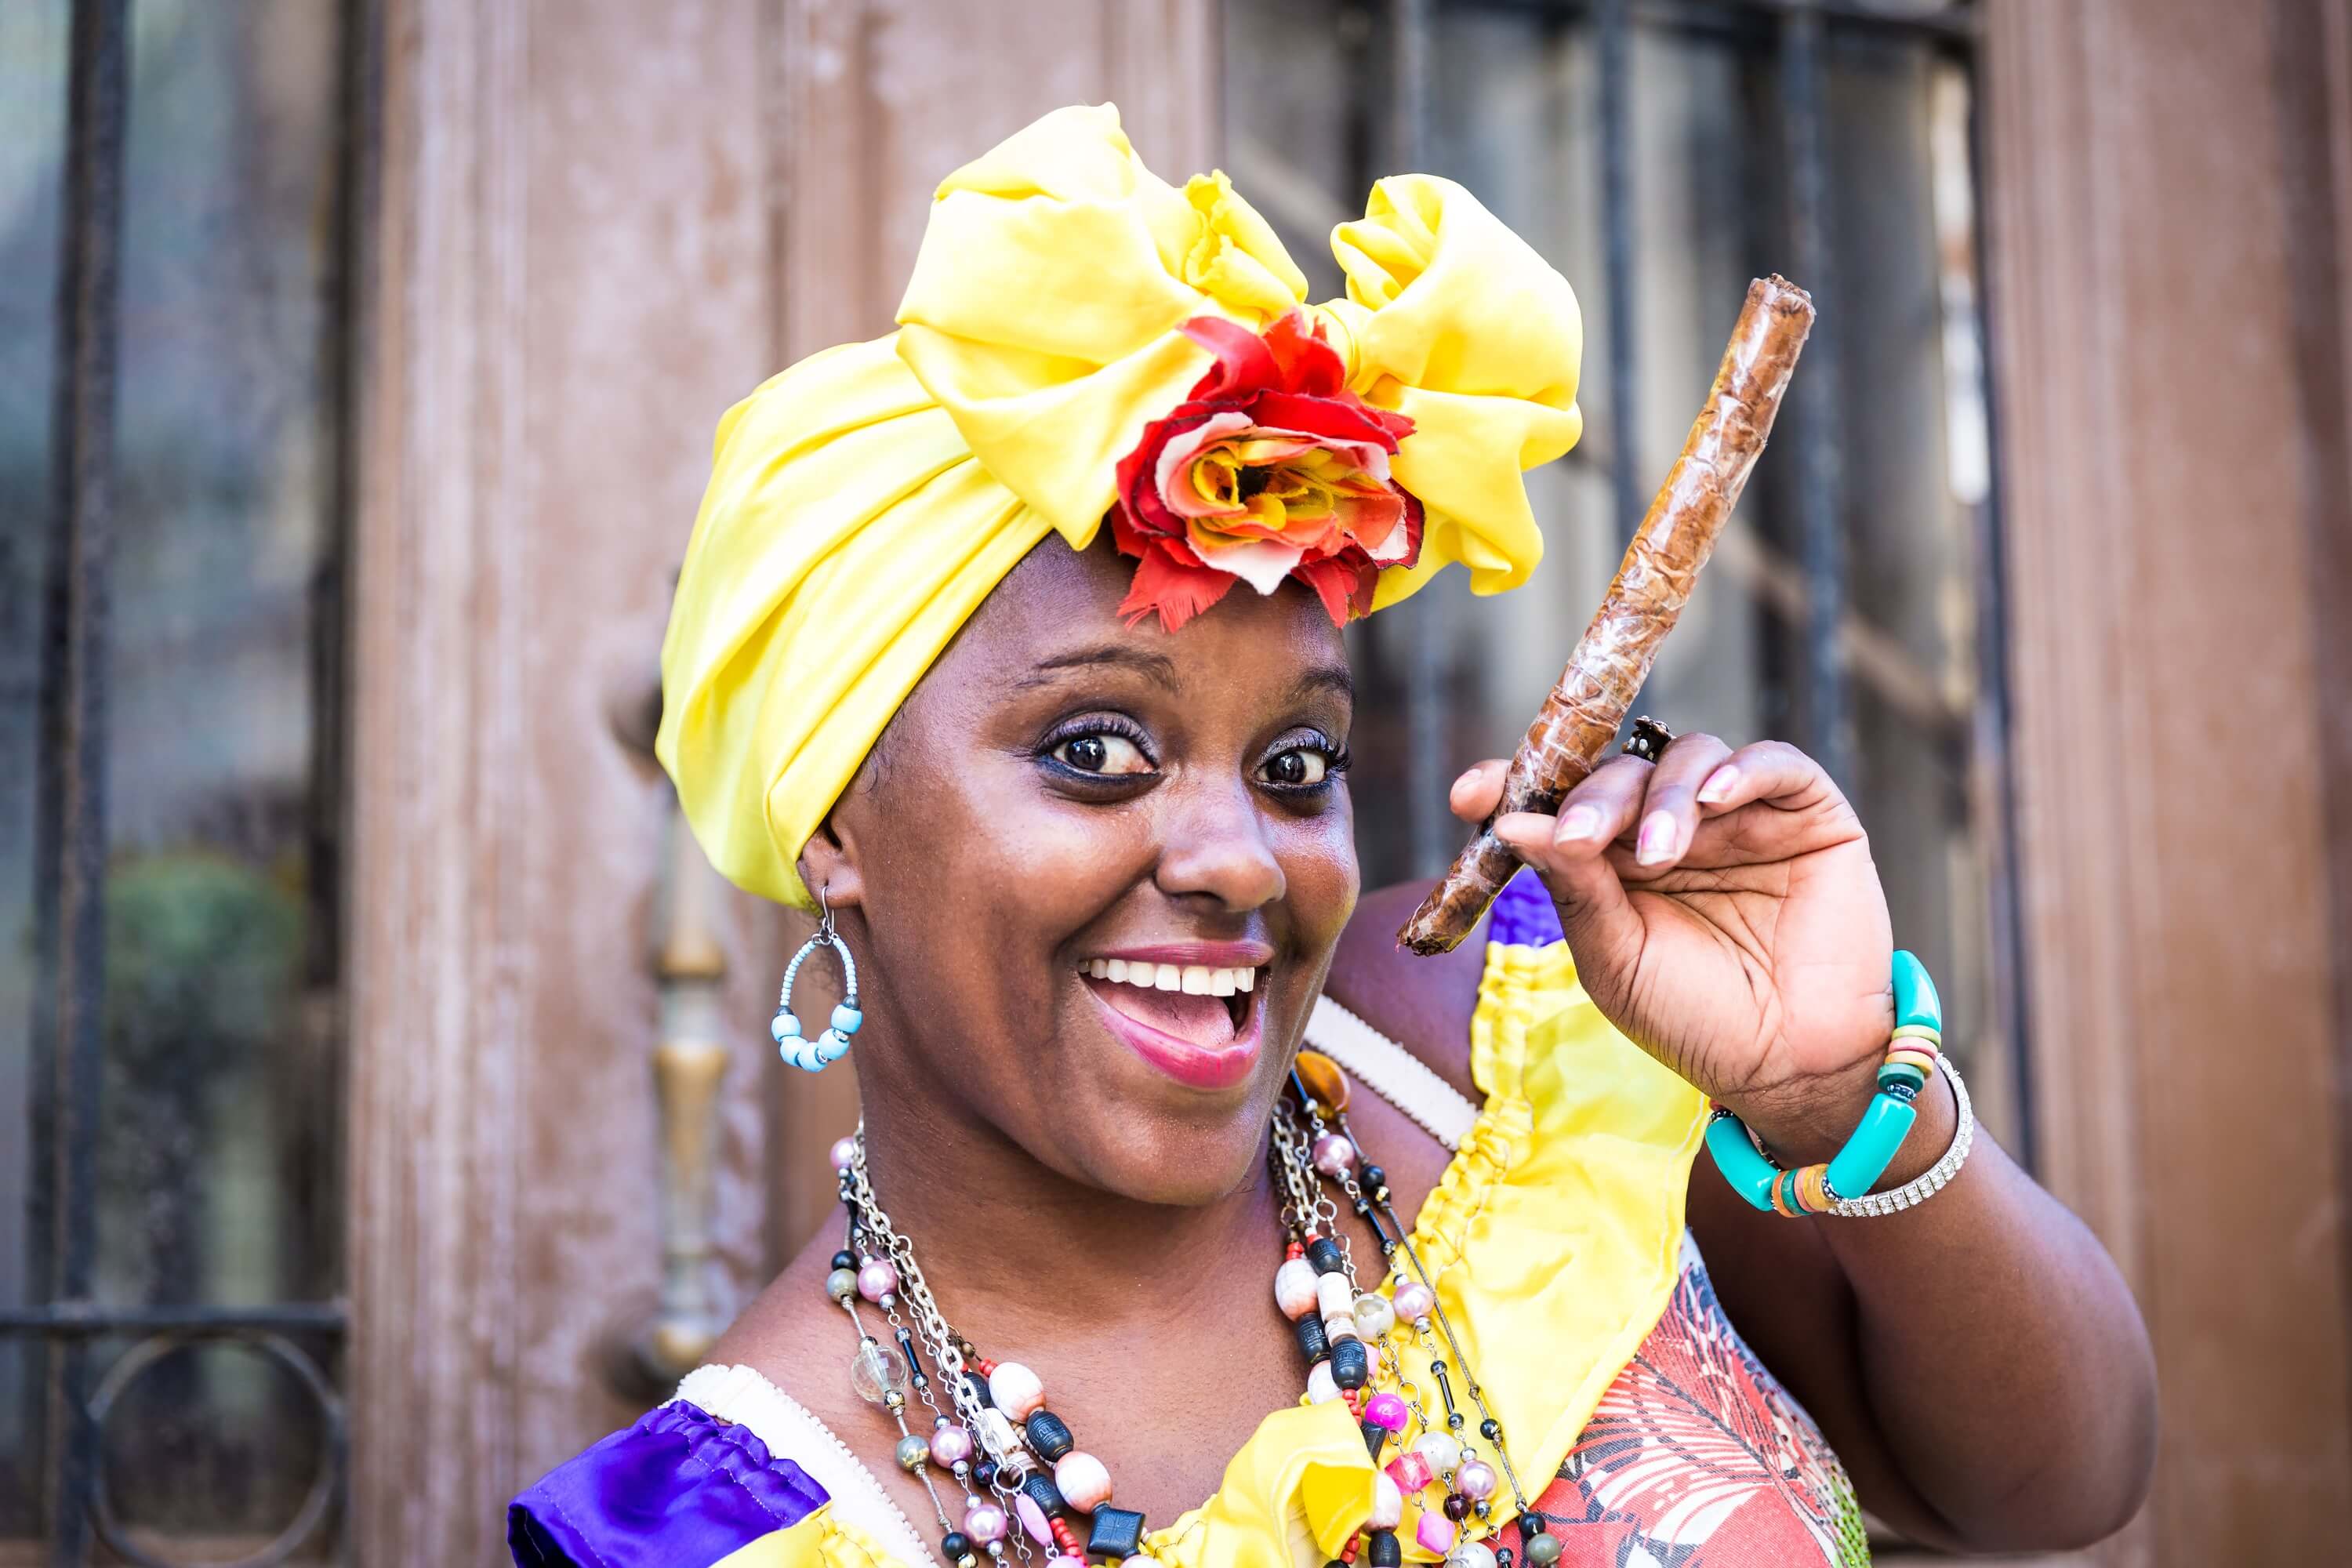 How-to-spend-48-hours-in-havana-Afro-Cuban-woman-with-cigar-1.jpg